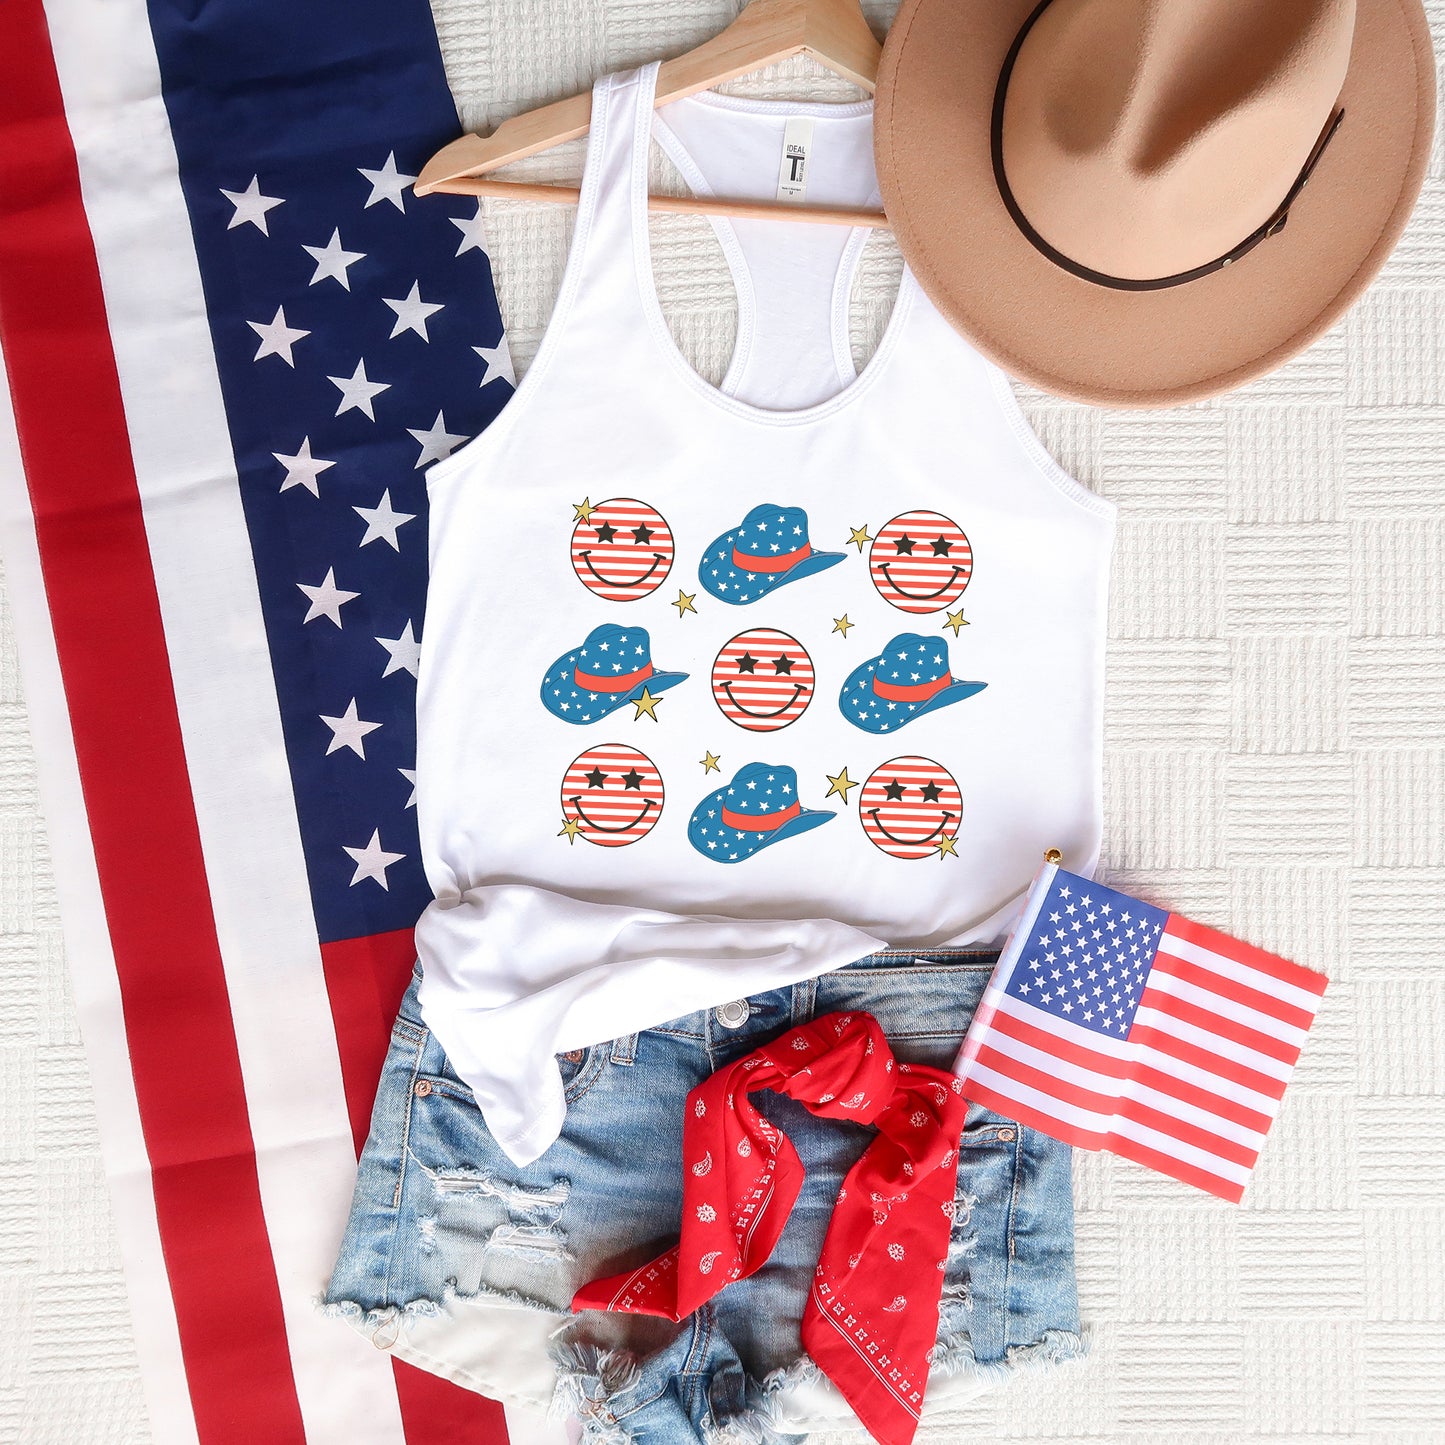 Cowgirl Smiley | Racerback Tank